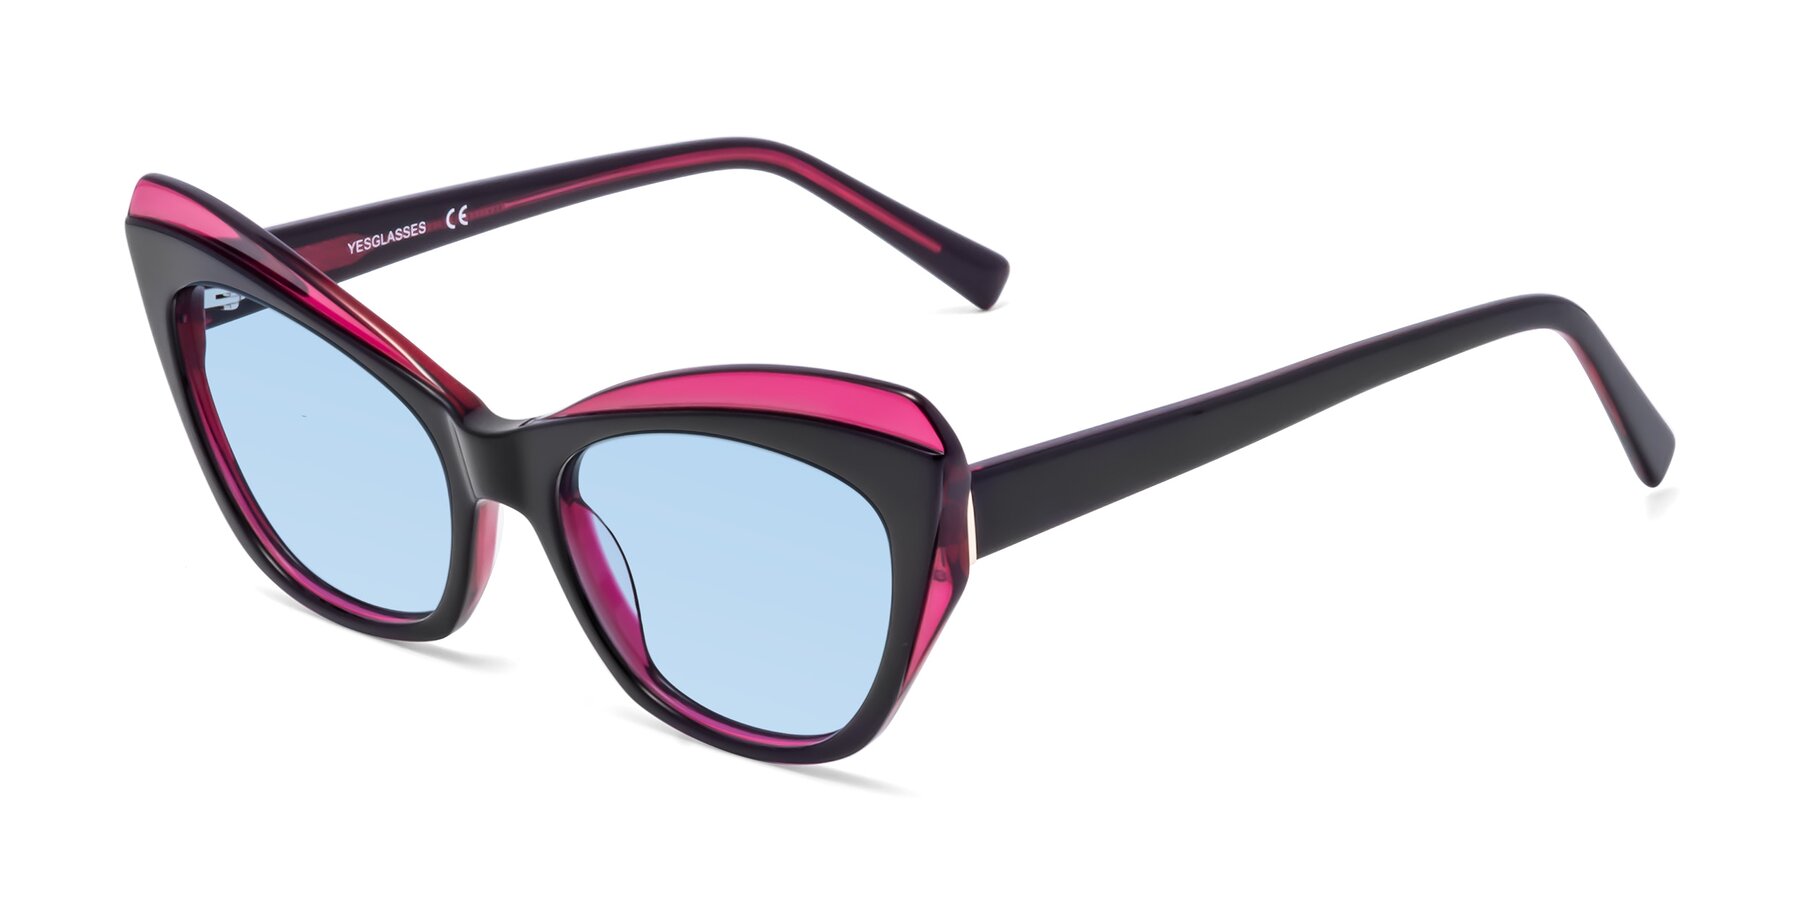 Angle of 1469 in Black-Plum with Light Blue Tinted Lenses